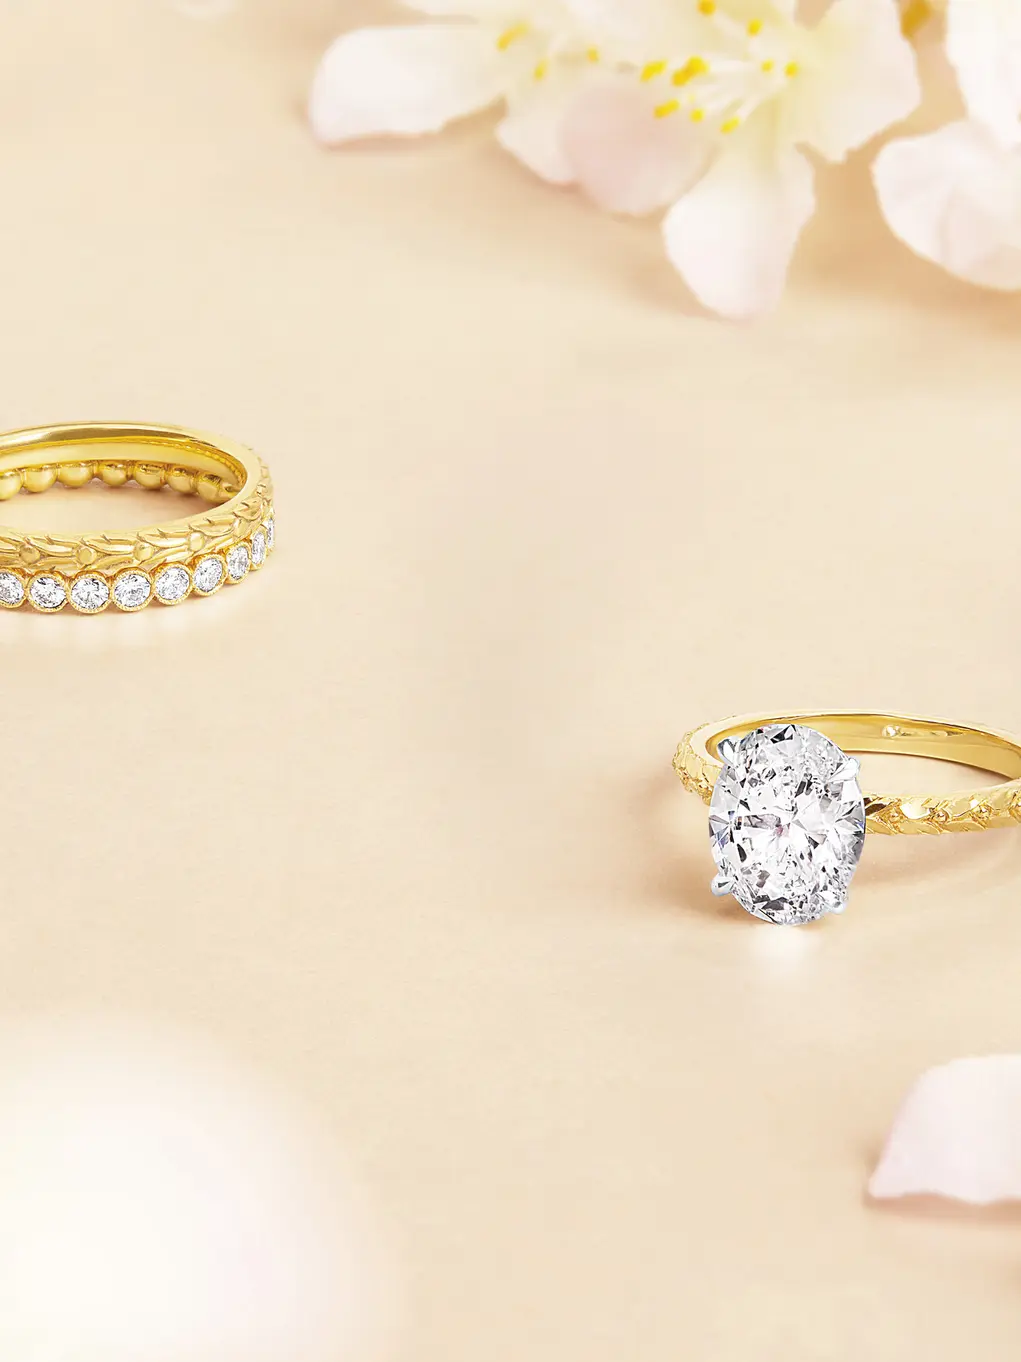 Two rings surrounded by petals 